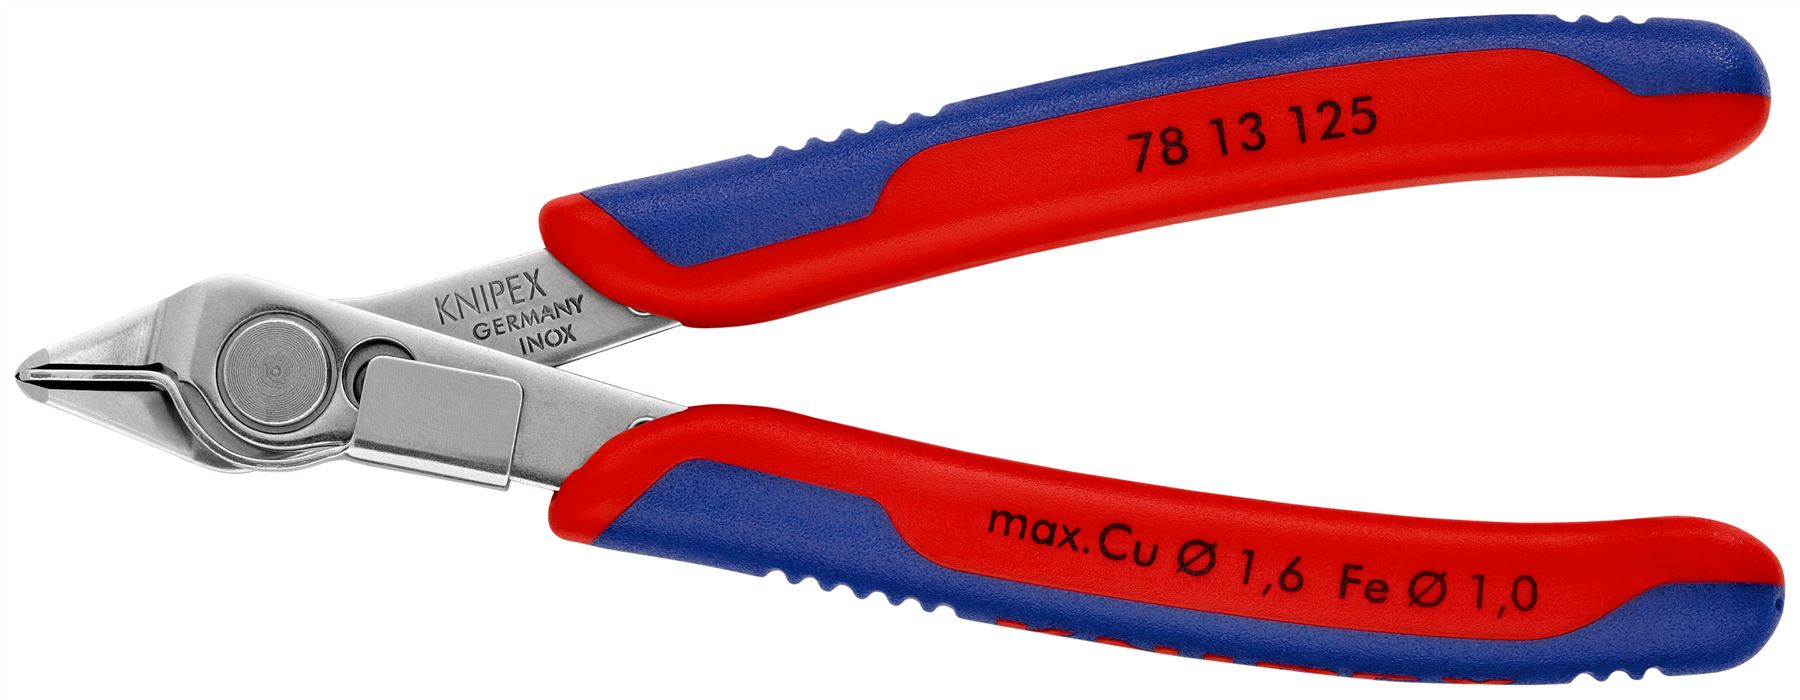 KNIPEX Electronics Super Knips Precision Cutting Pliers 125mm Multi Component Grips 78 13 125